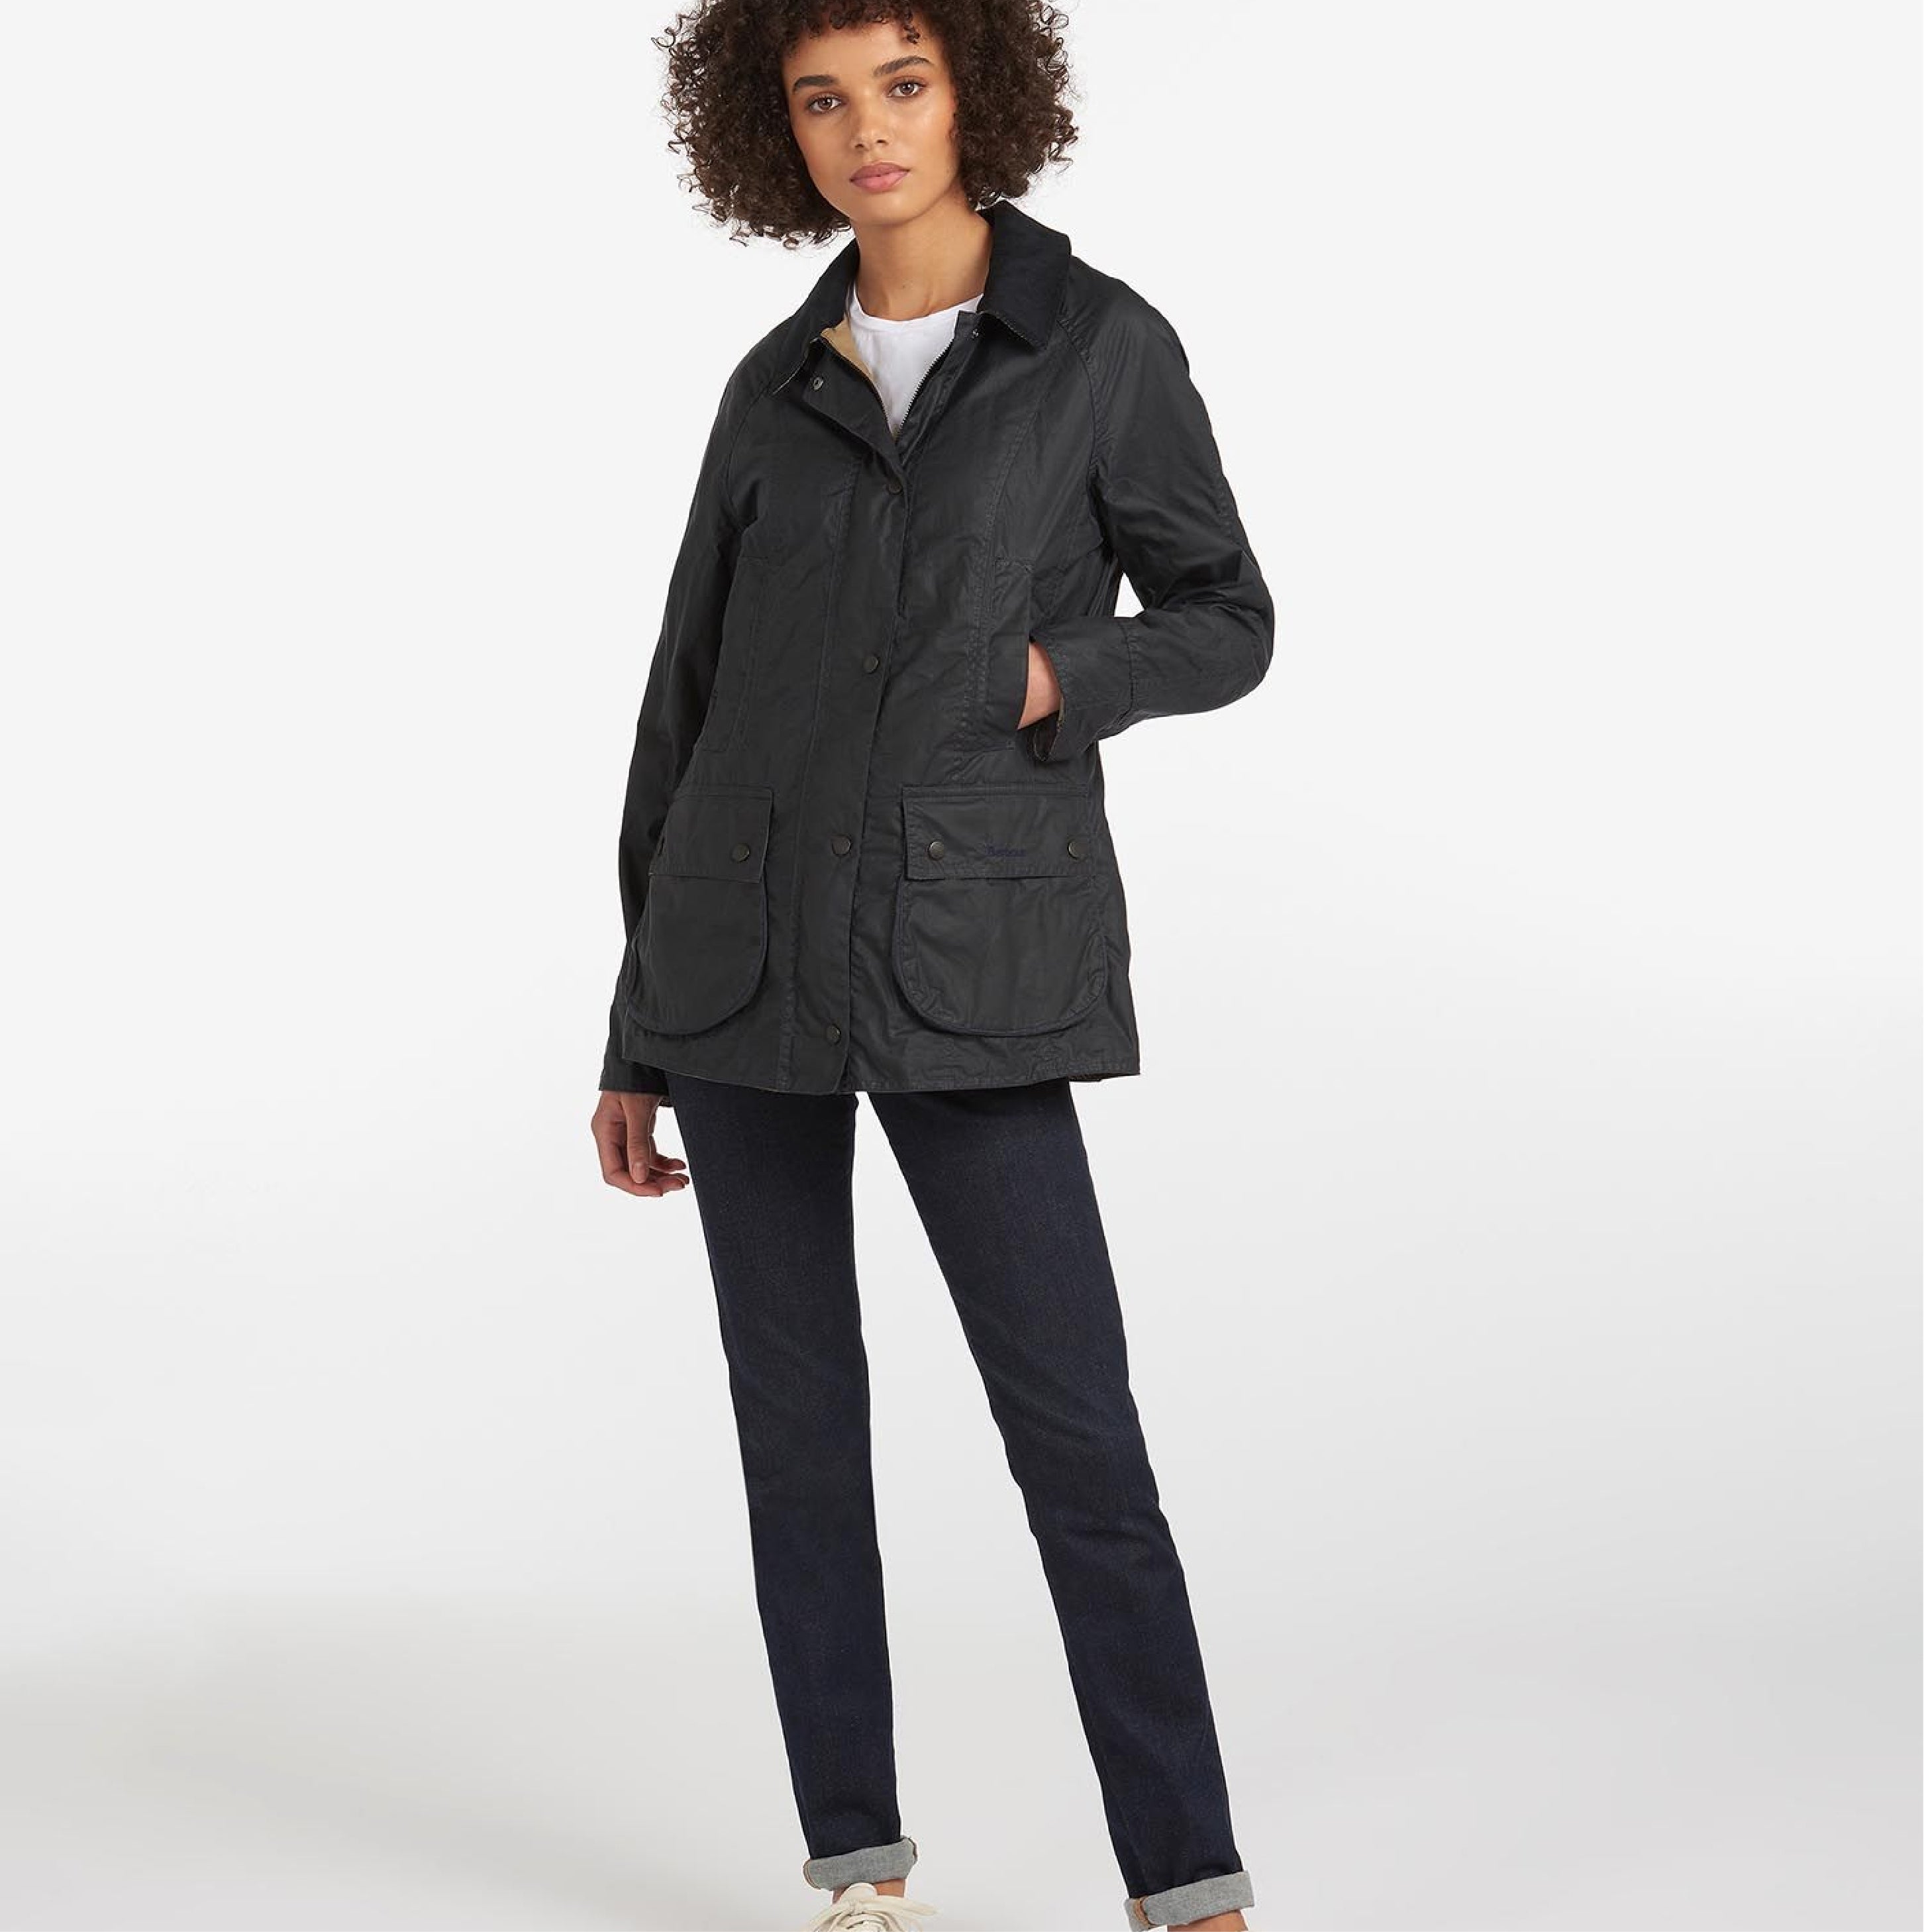 Barbour L/Wt Beadnell Royal